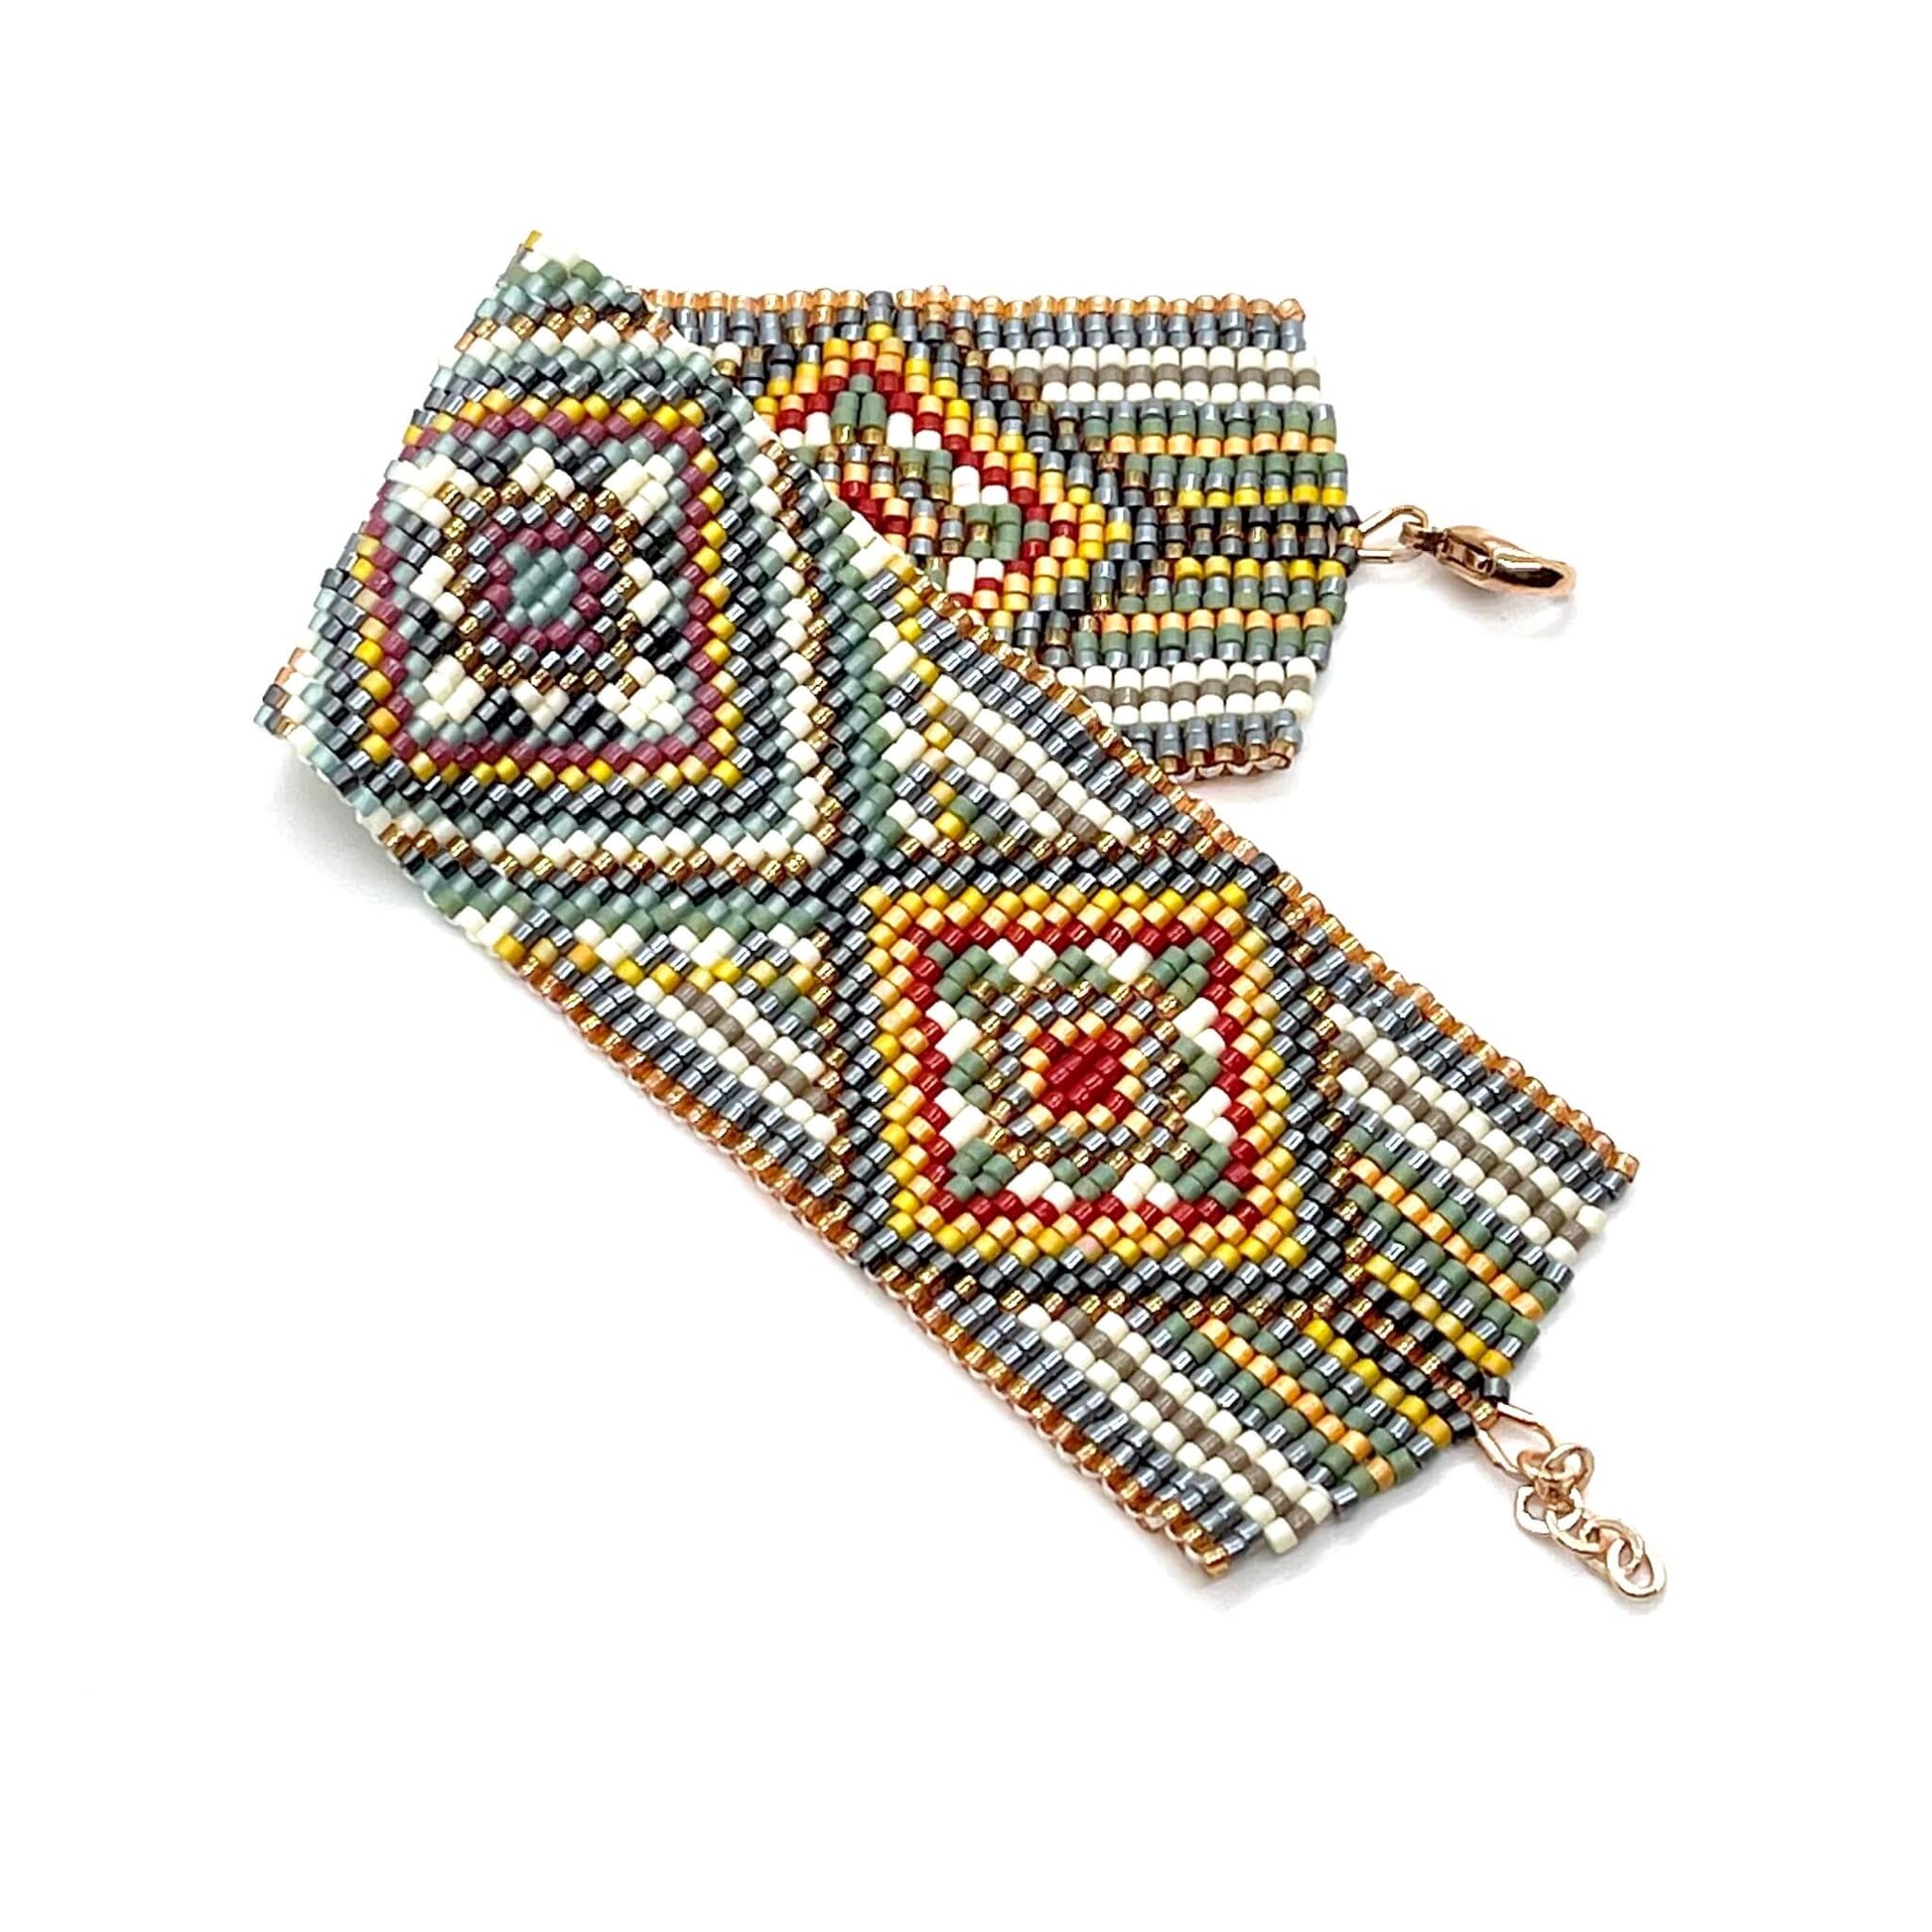 Wide beaded yellow, green, and red, diamond pattern seed bead statement bracelet.